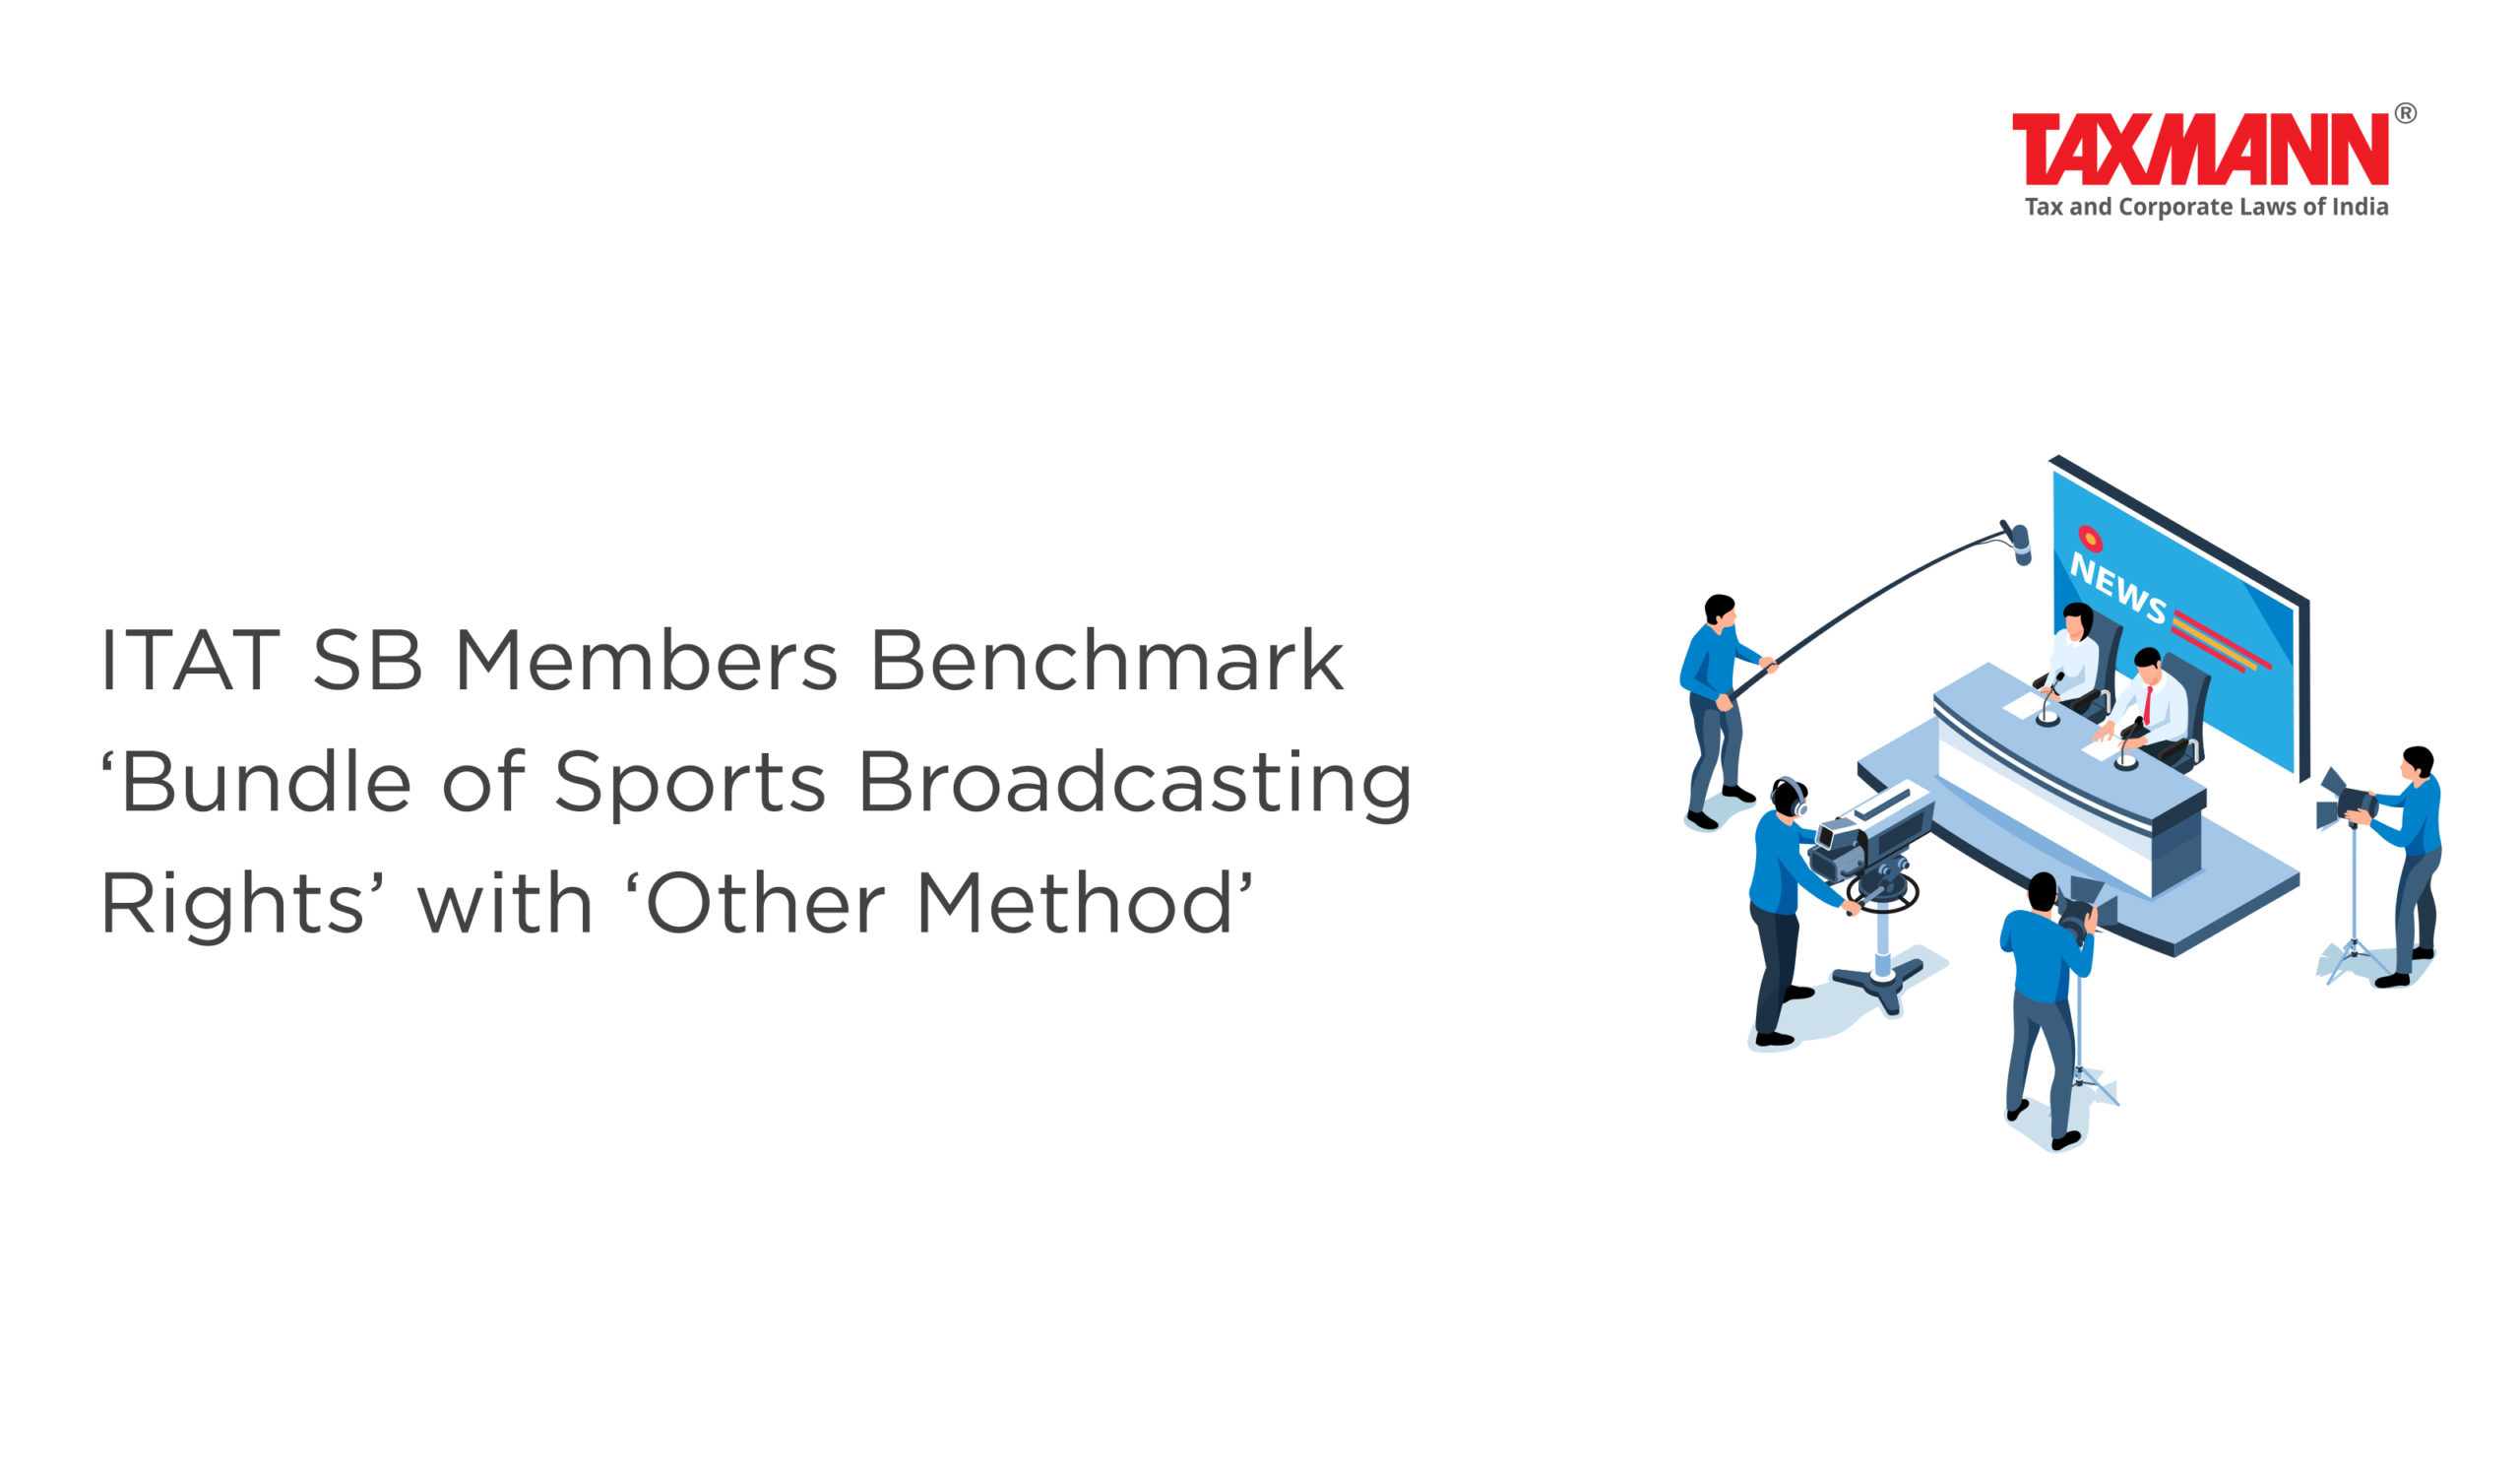 Determining the Arm's Length Price (ALP) of broadcasting rights